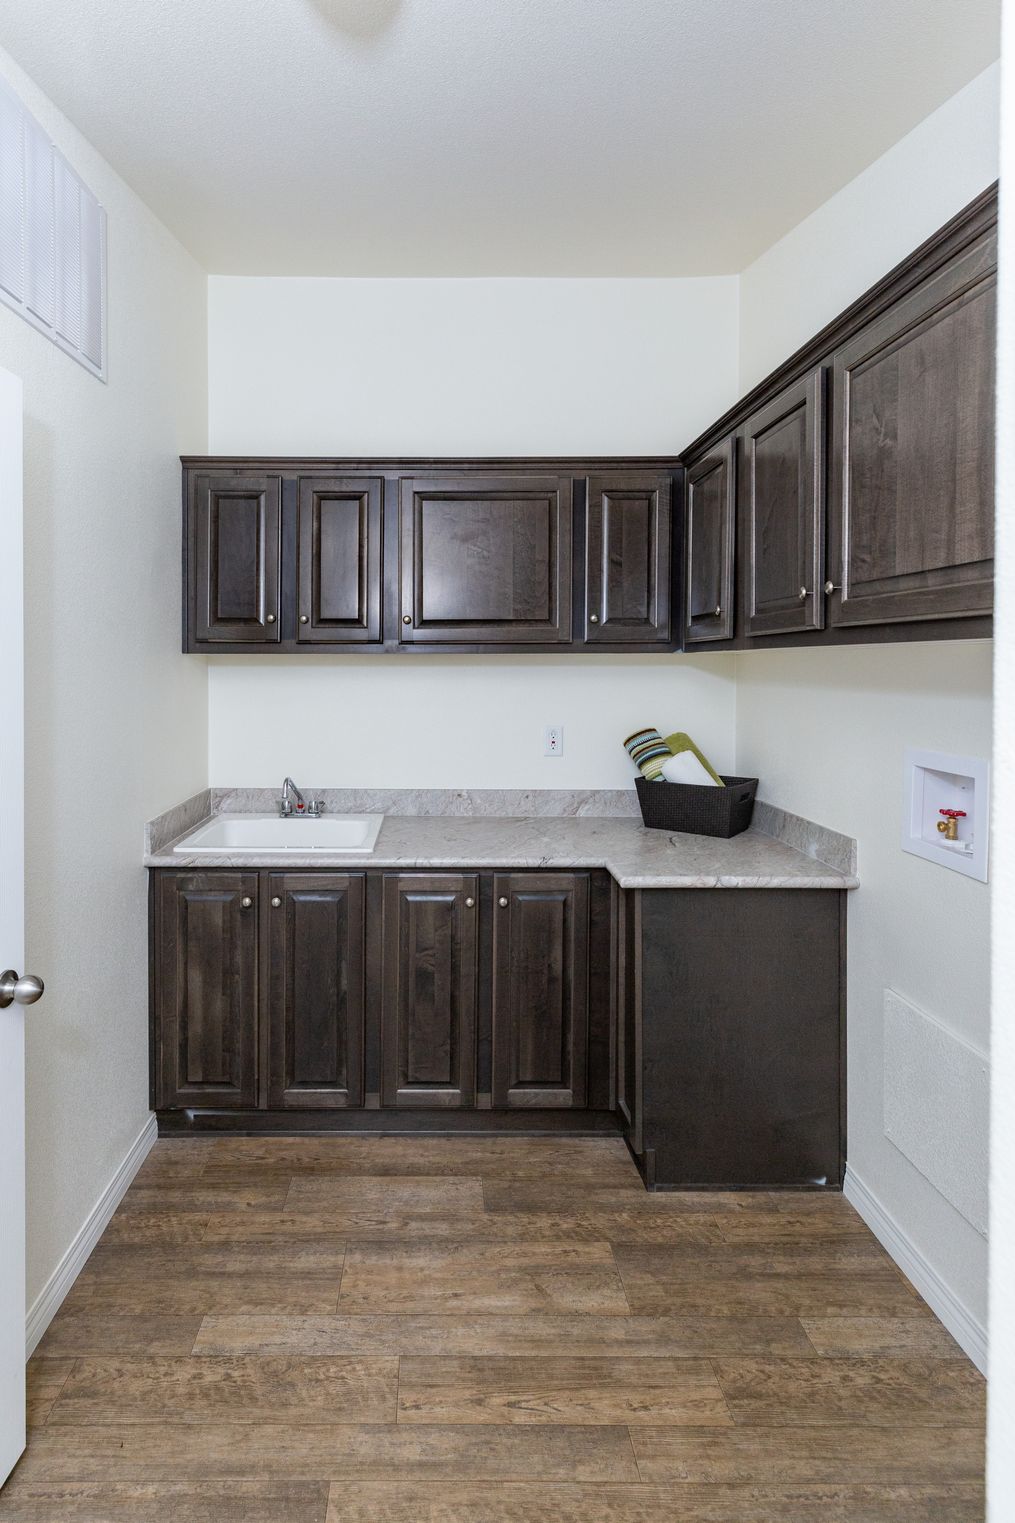 The CK661F Utility Room. This Manufactured Mobile Home features 3 bedrooms and 2 baths.